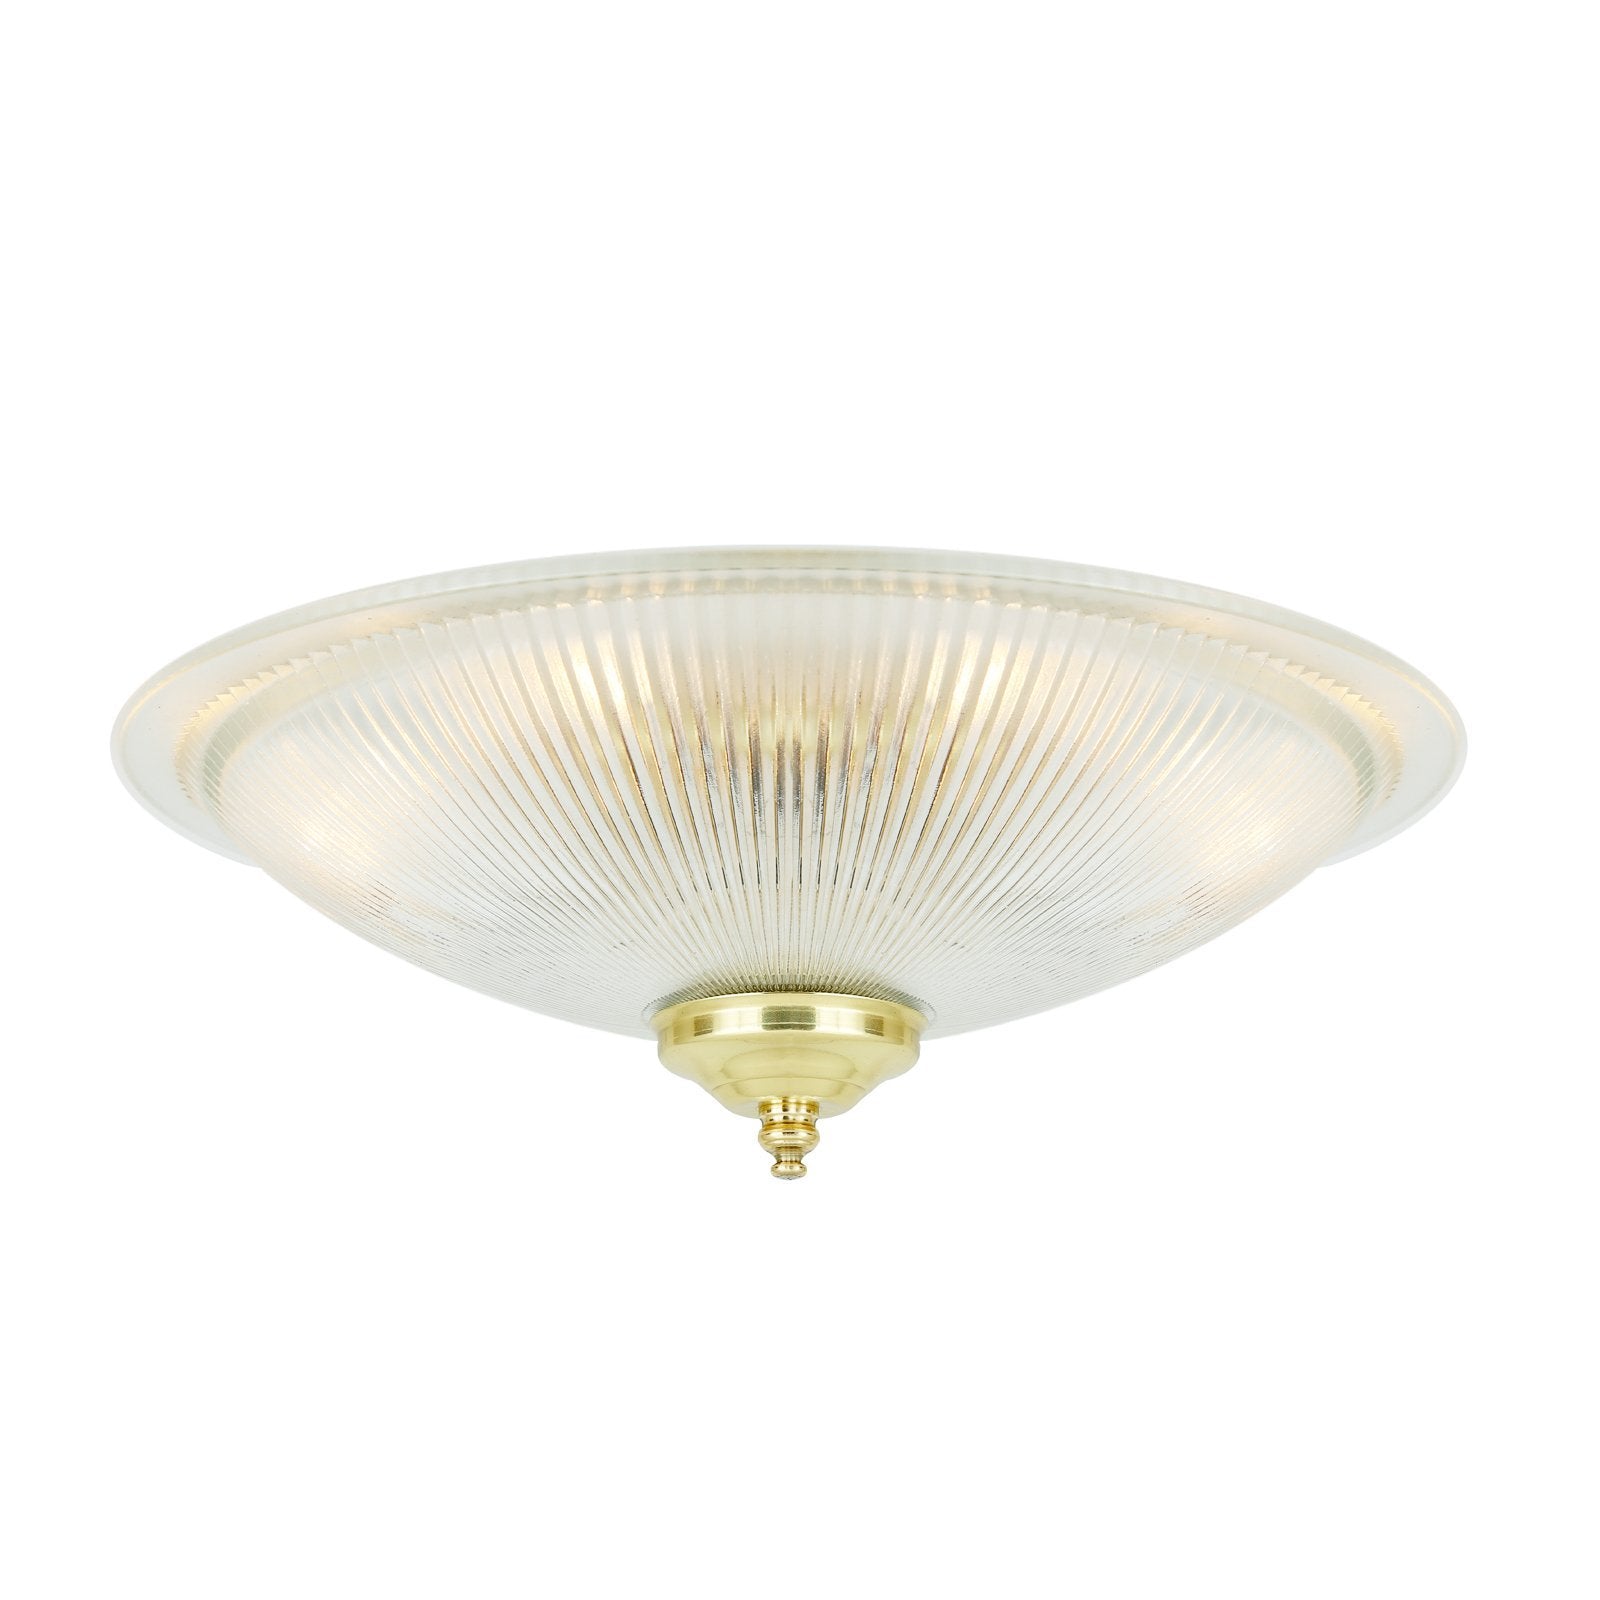 Nicosa Shallow Holophane Ceiling Light - Ceiling Lights from RETROLIGHT. Made by Mullan Lighting.